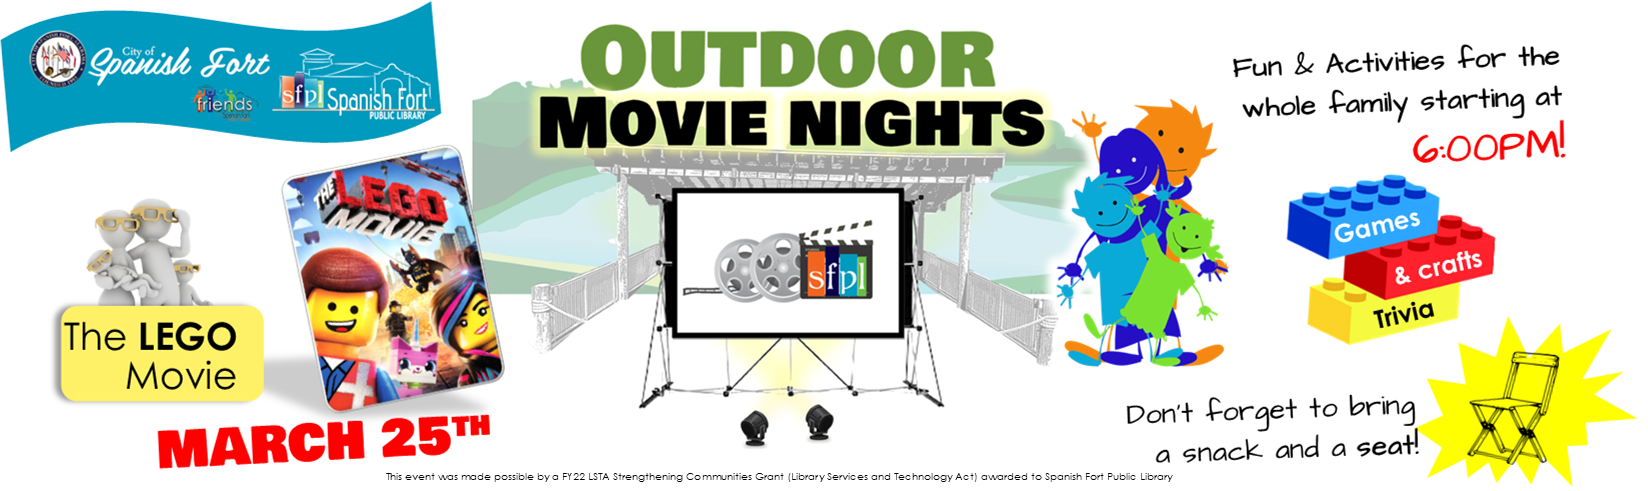 Outdoor movies on the back patio are here! A fun family night for all ages. Bring a picnic dinner and your tailgate chairs and join the Spanish Fort Public Library and the City of Spanish Fort as we host OUTDOOR MOVIE NIGHT on the back patio lawn. This project was made possible by a FY22 Library Services and Technology Act (LSTA) grant. Back patio open for guests at 6 p.m. Movie starts at 7 p.m. (dusk).